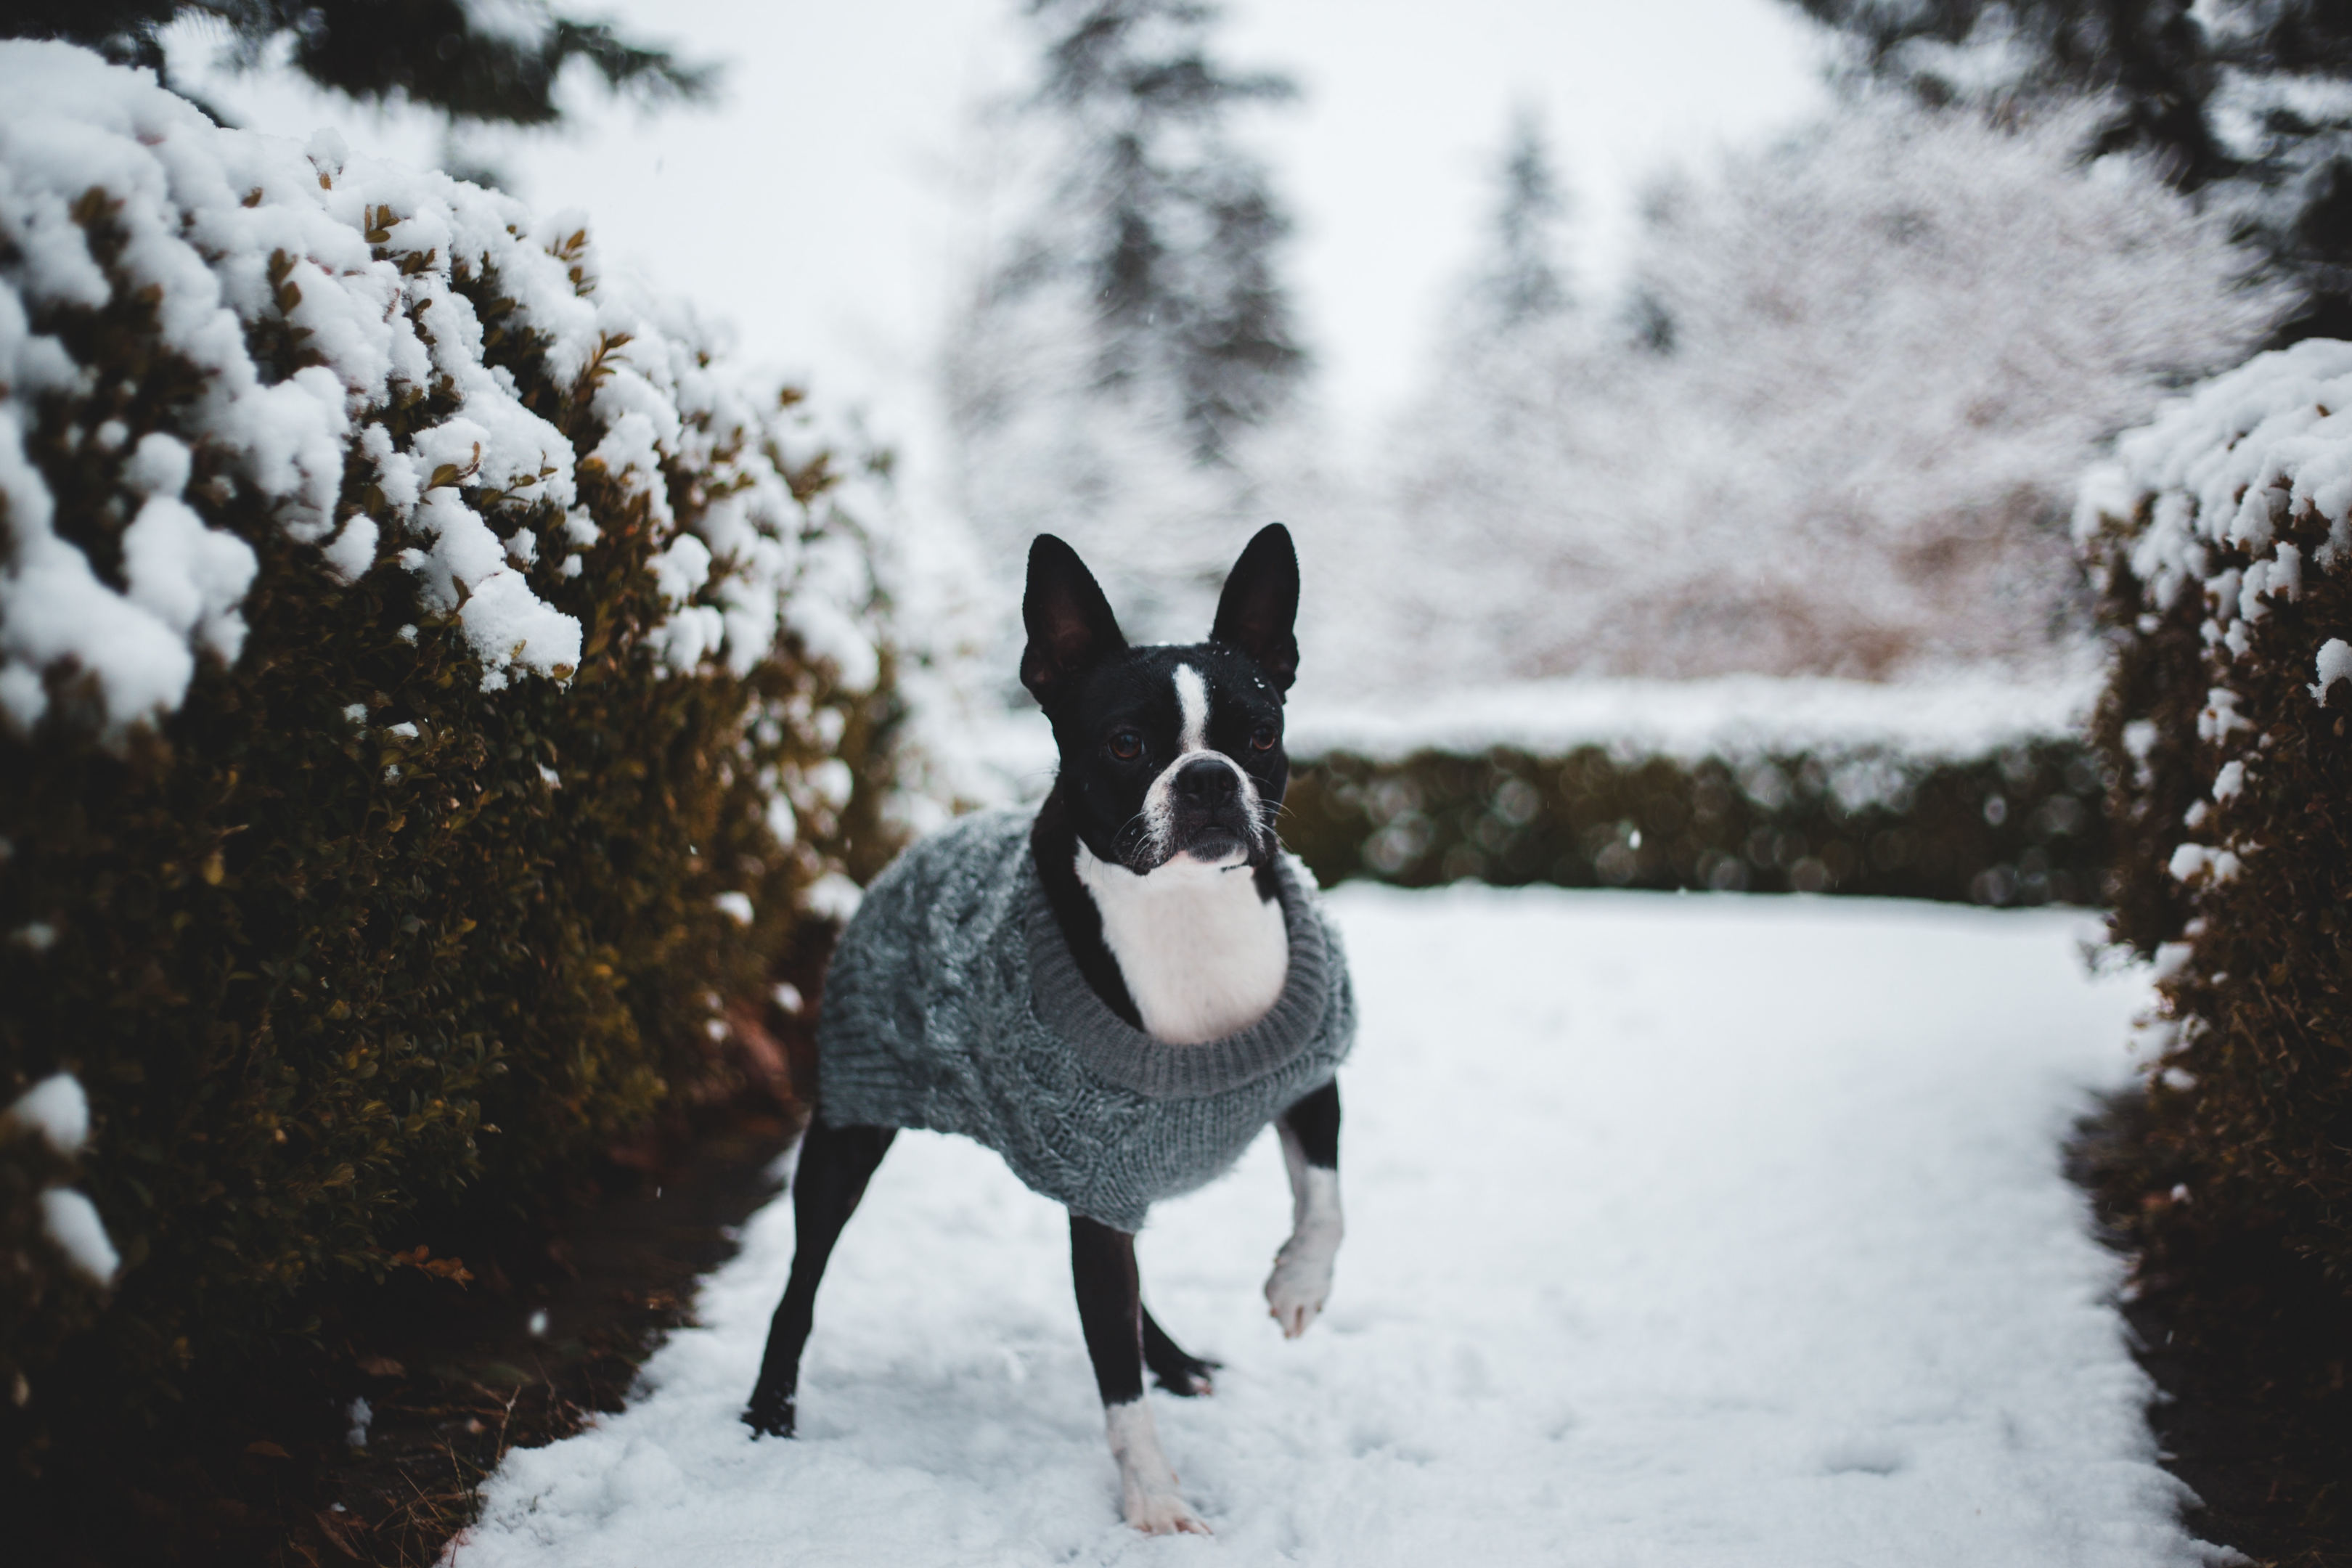 A Boston Terrier playing in the snow.